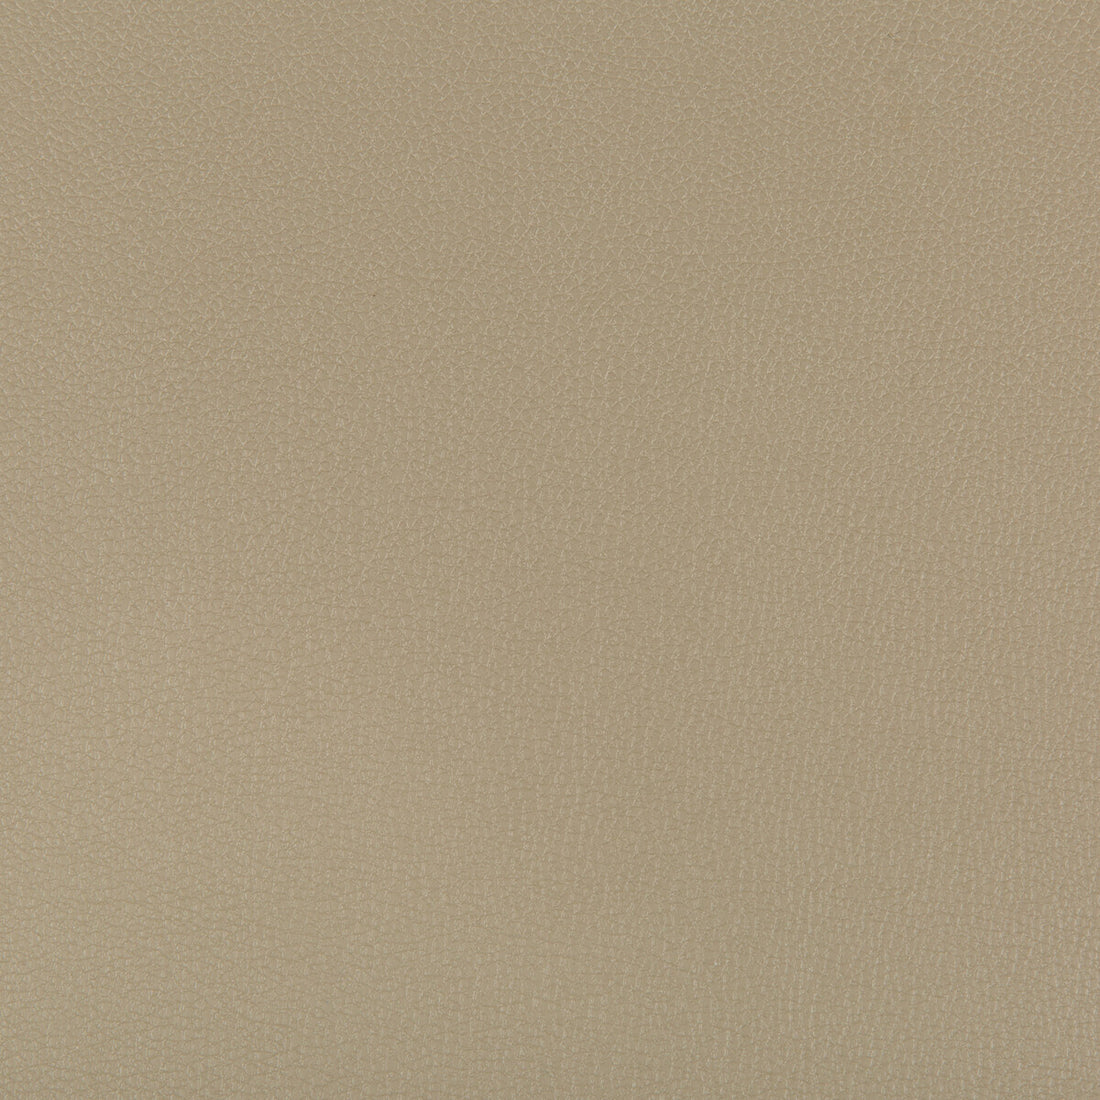 Syrus fabric in elm color - pattern SYRUS.316.0 - by Kravet Contract